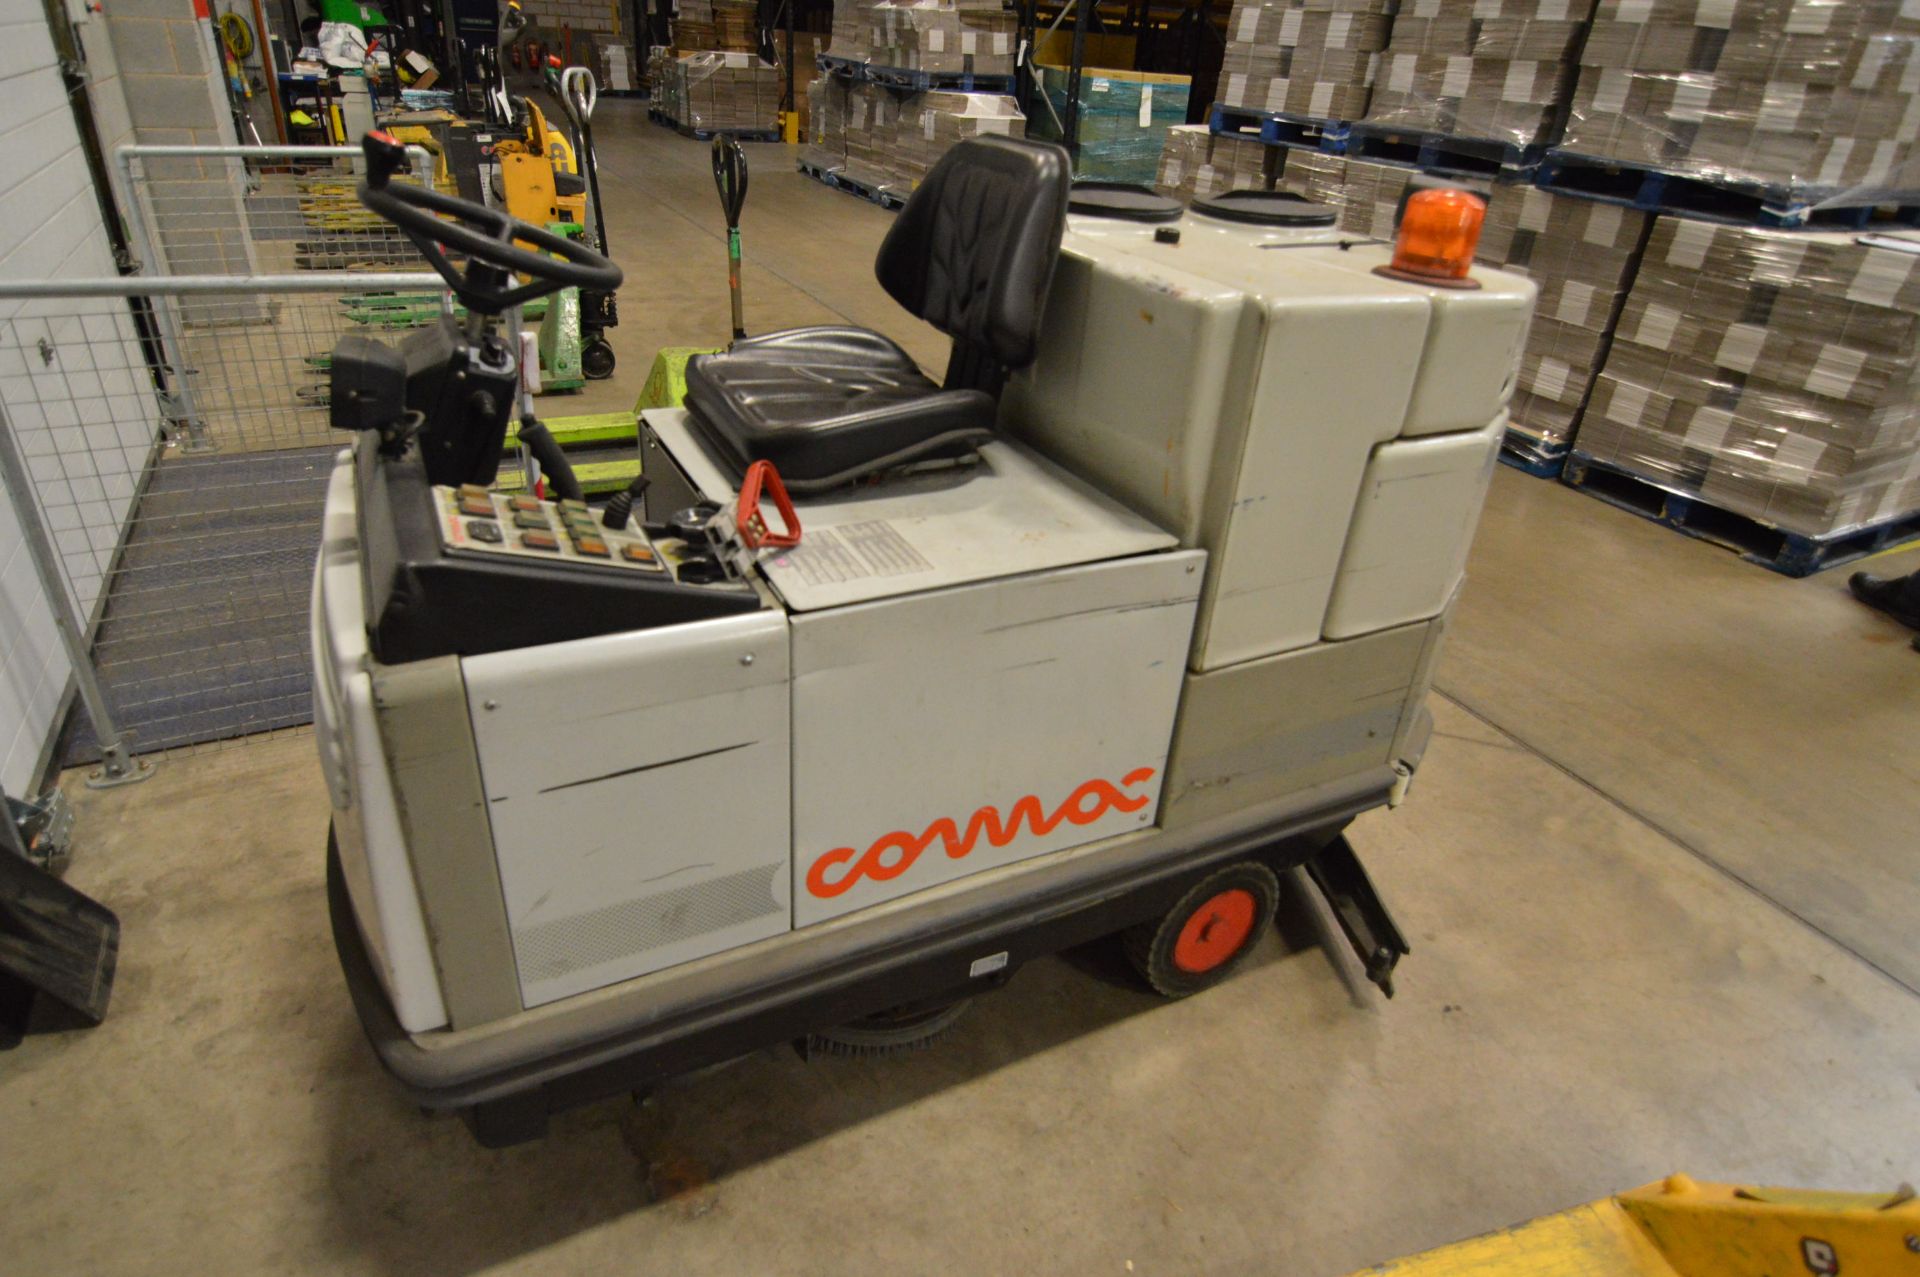 Comac C85B RIDE-ON-FLOOR CLEANING MACHINE, serial - Image 2 of 5